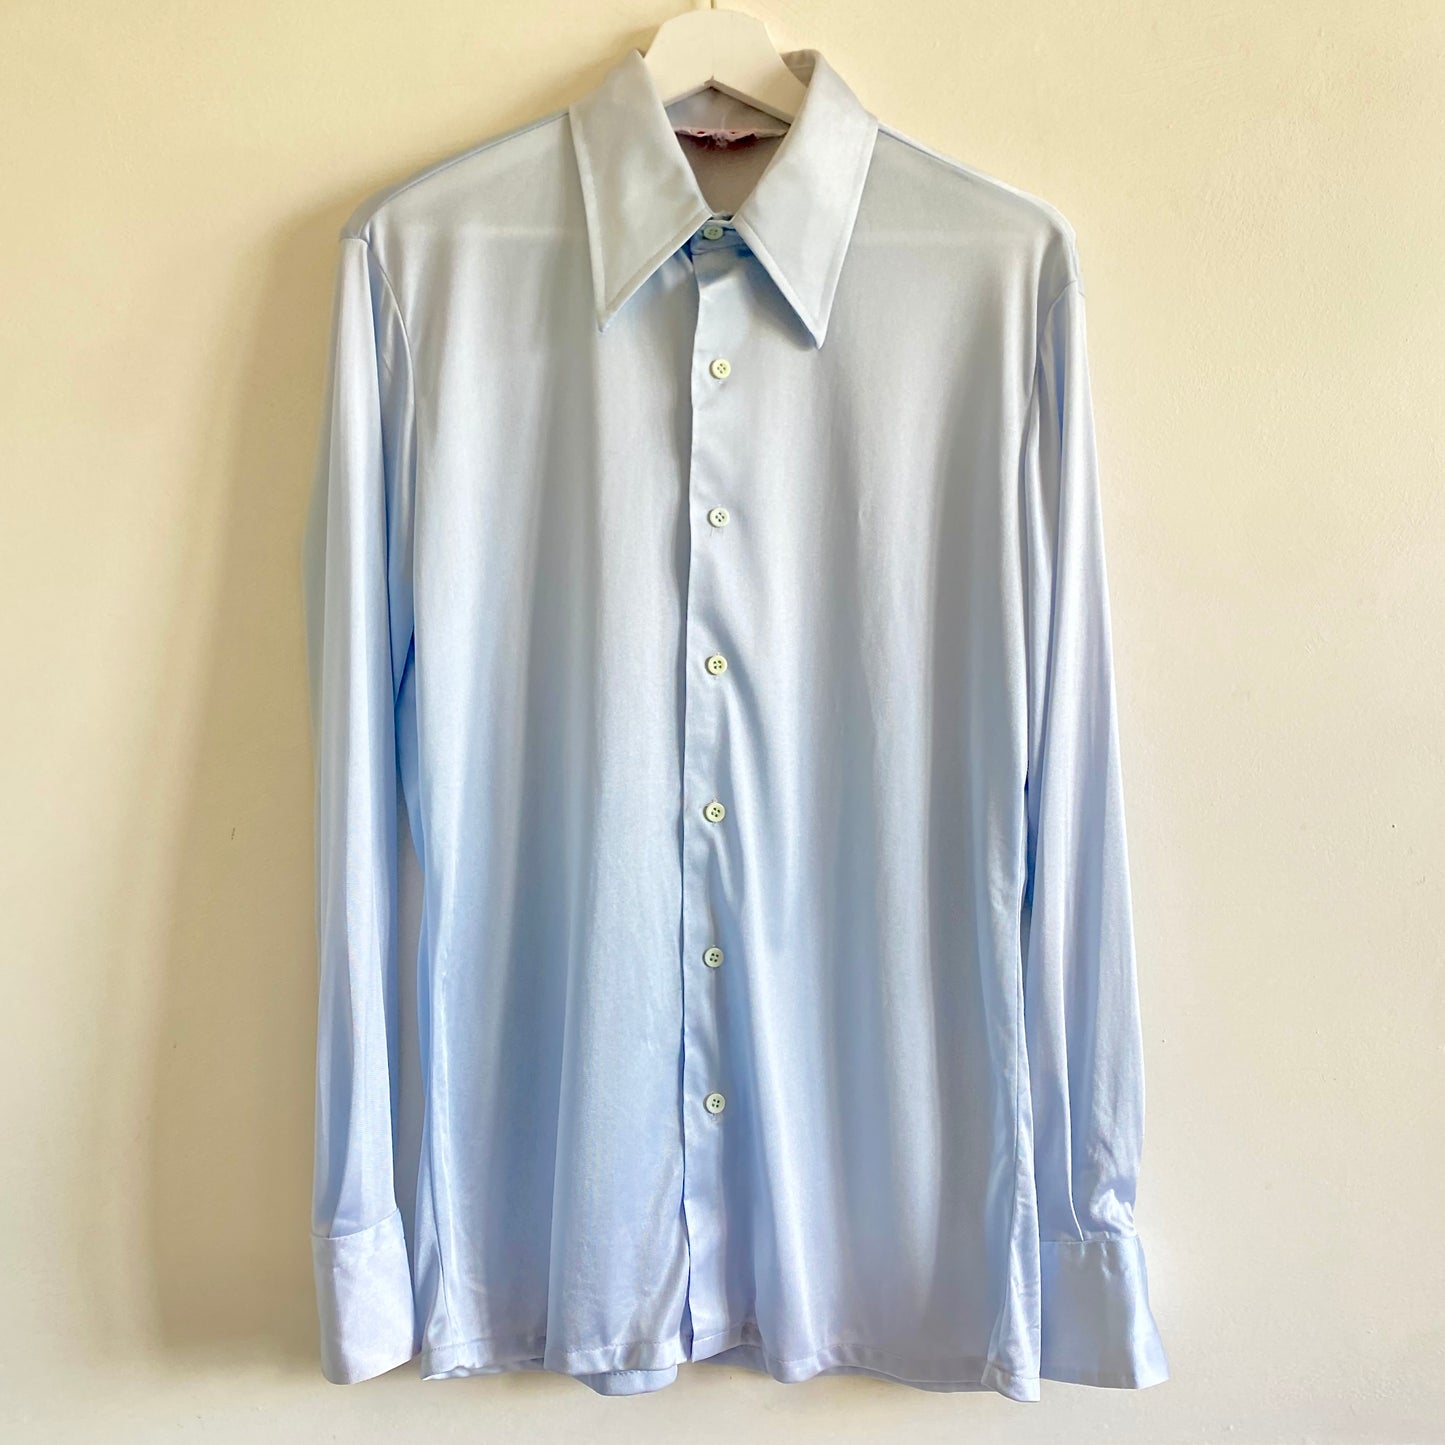 70s vintage Ice blue Men's shirt Dagger collars Button down front fastening Single button cuff  Silky stretch polyester feel fabric  Machine washable